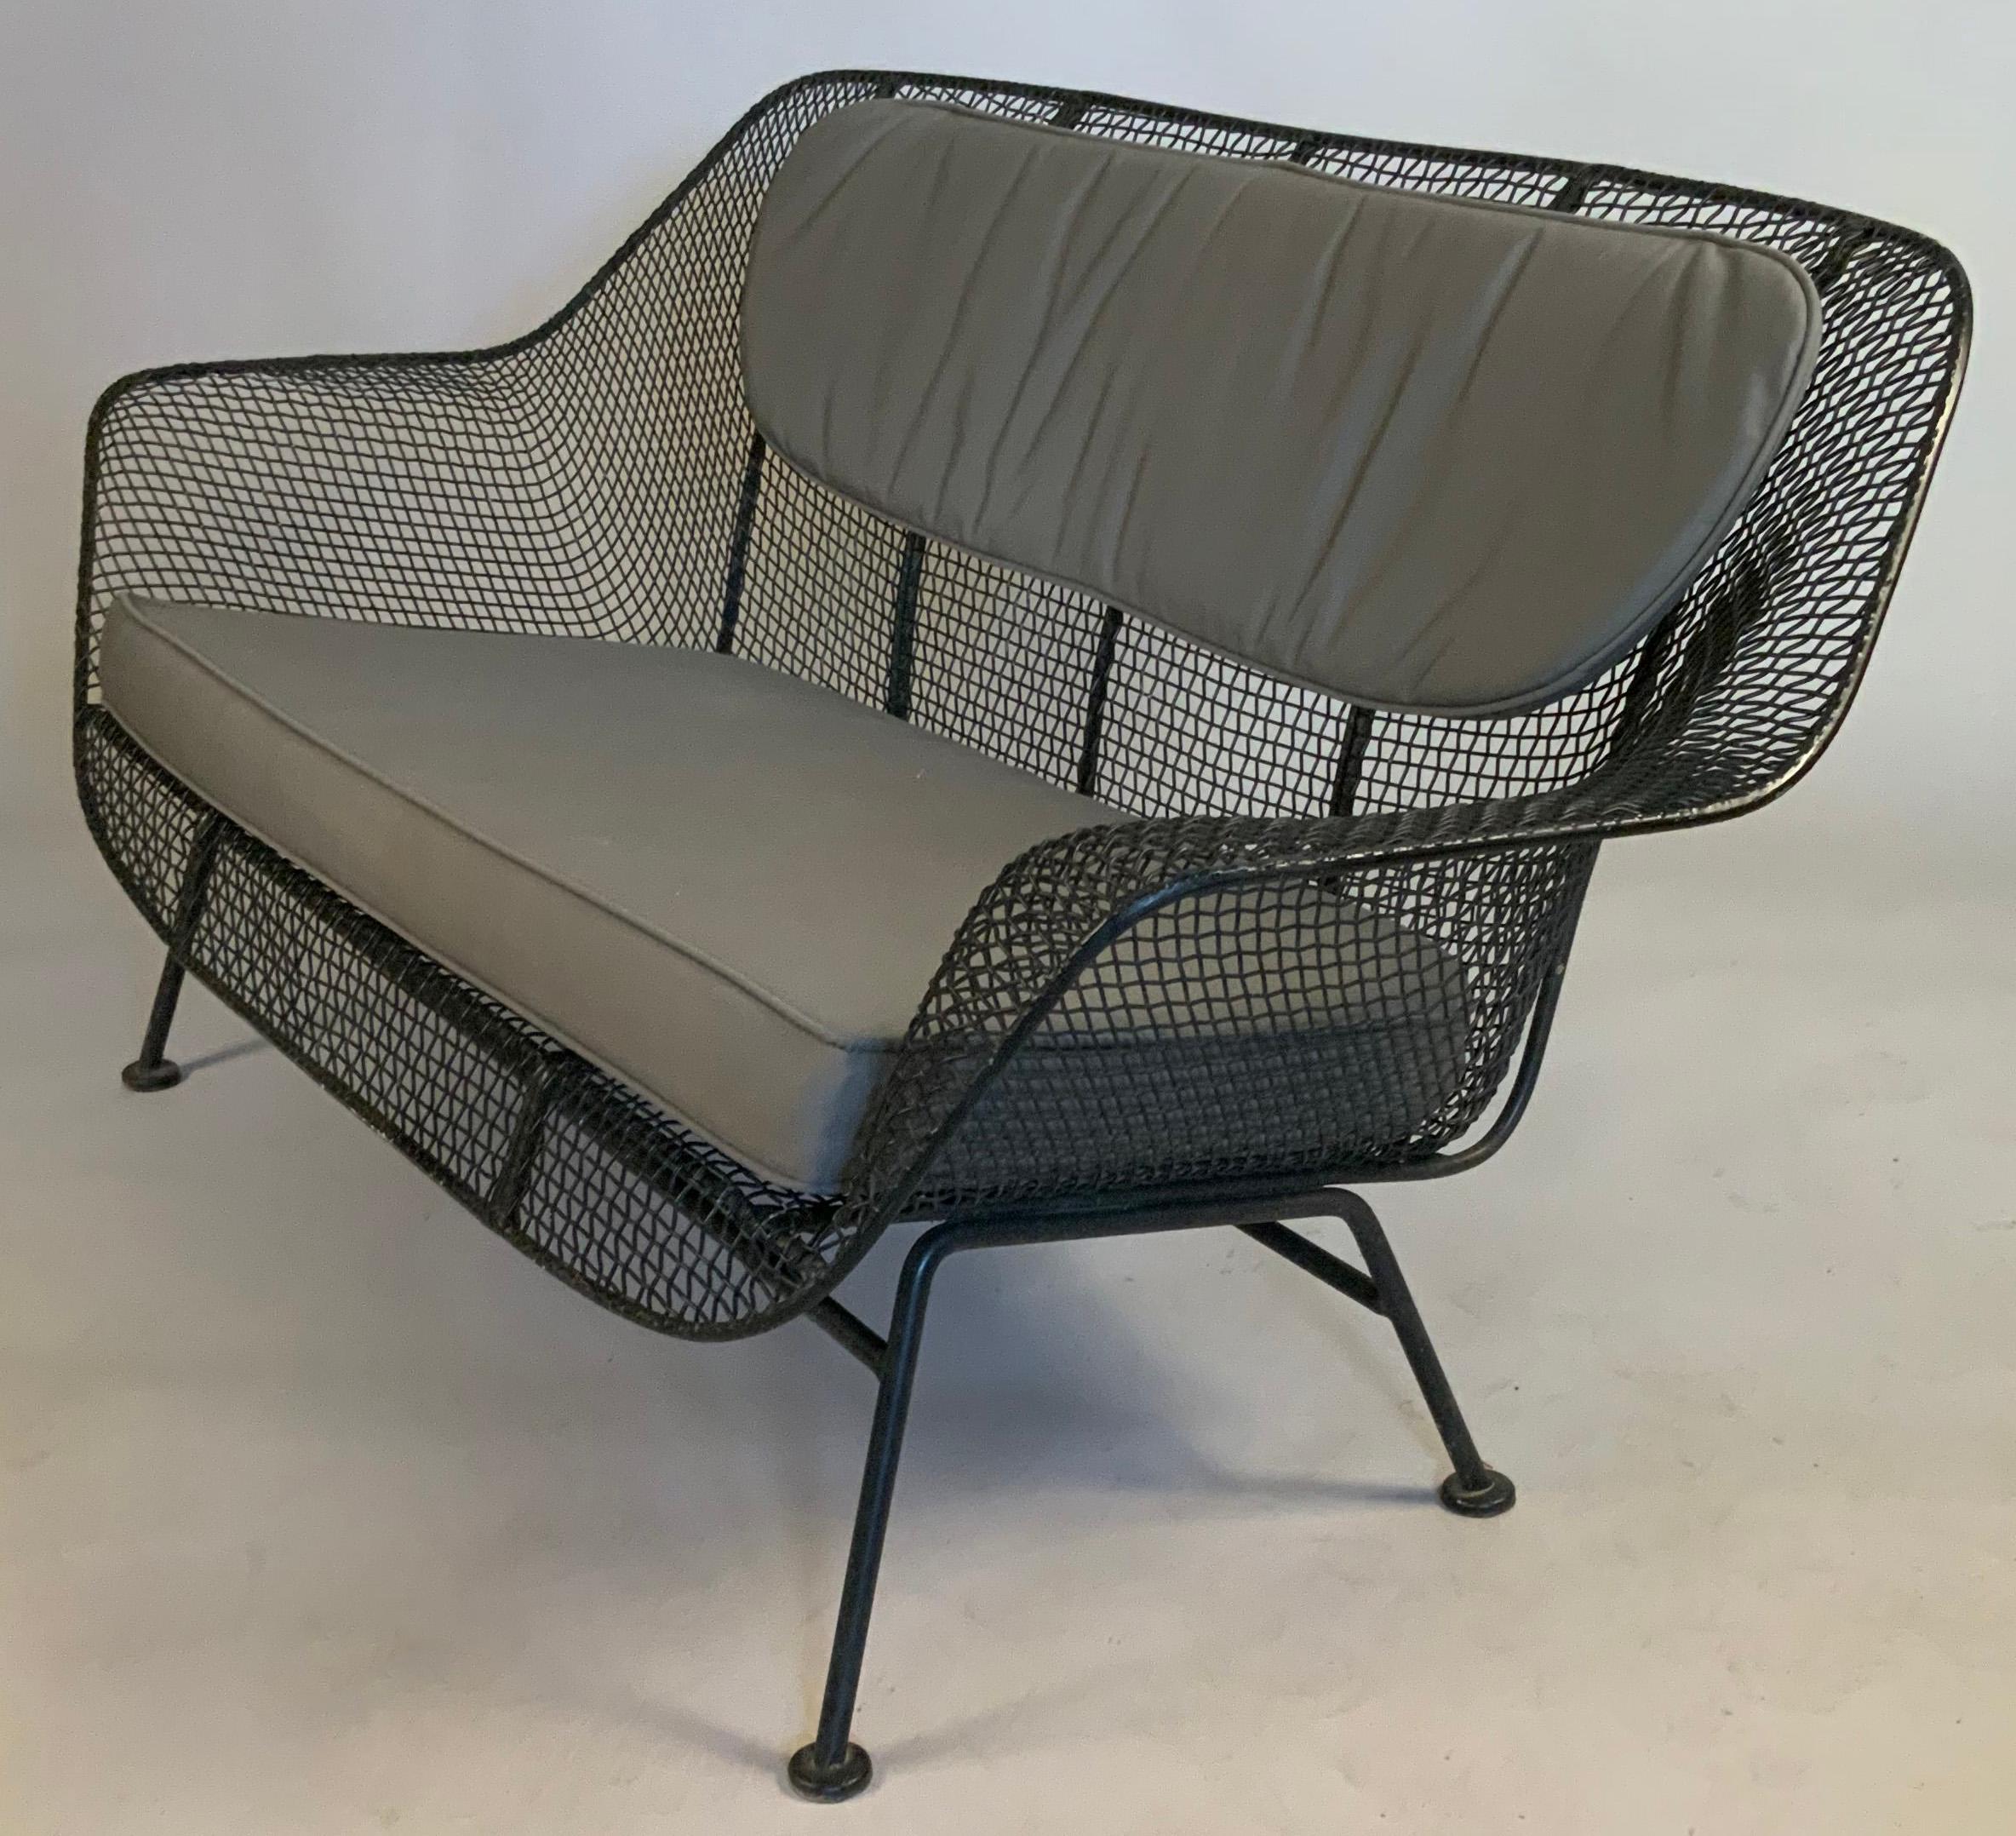 A 1950's wrought iron and steel mesh settee from Russell Woodard's iconic Sculptura series. Beautiful and Classic sculptural design, finished in black, but can be finished in any color you choose. Cushions not included but can be custom ordered in